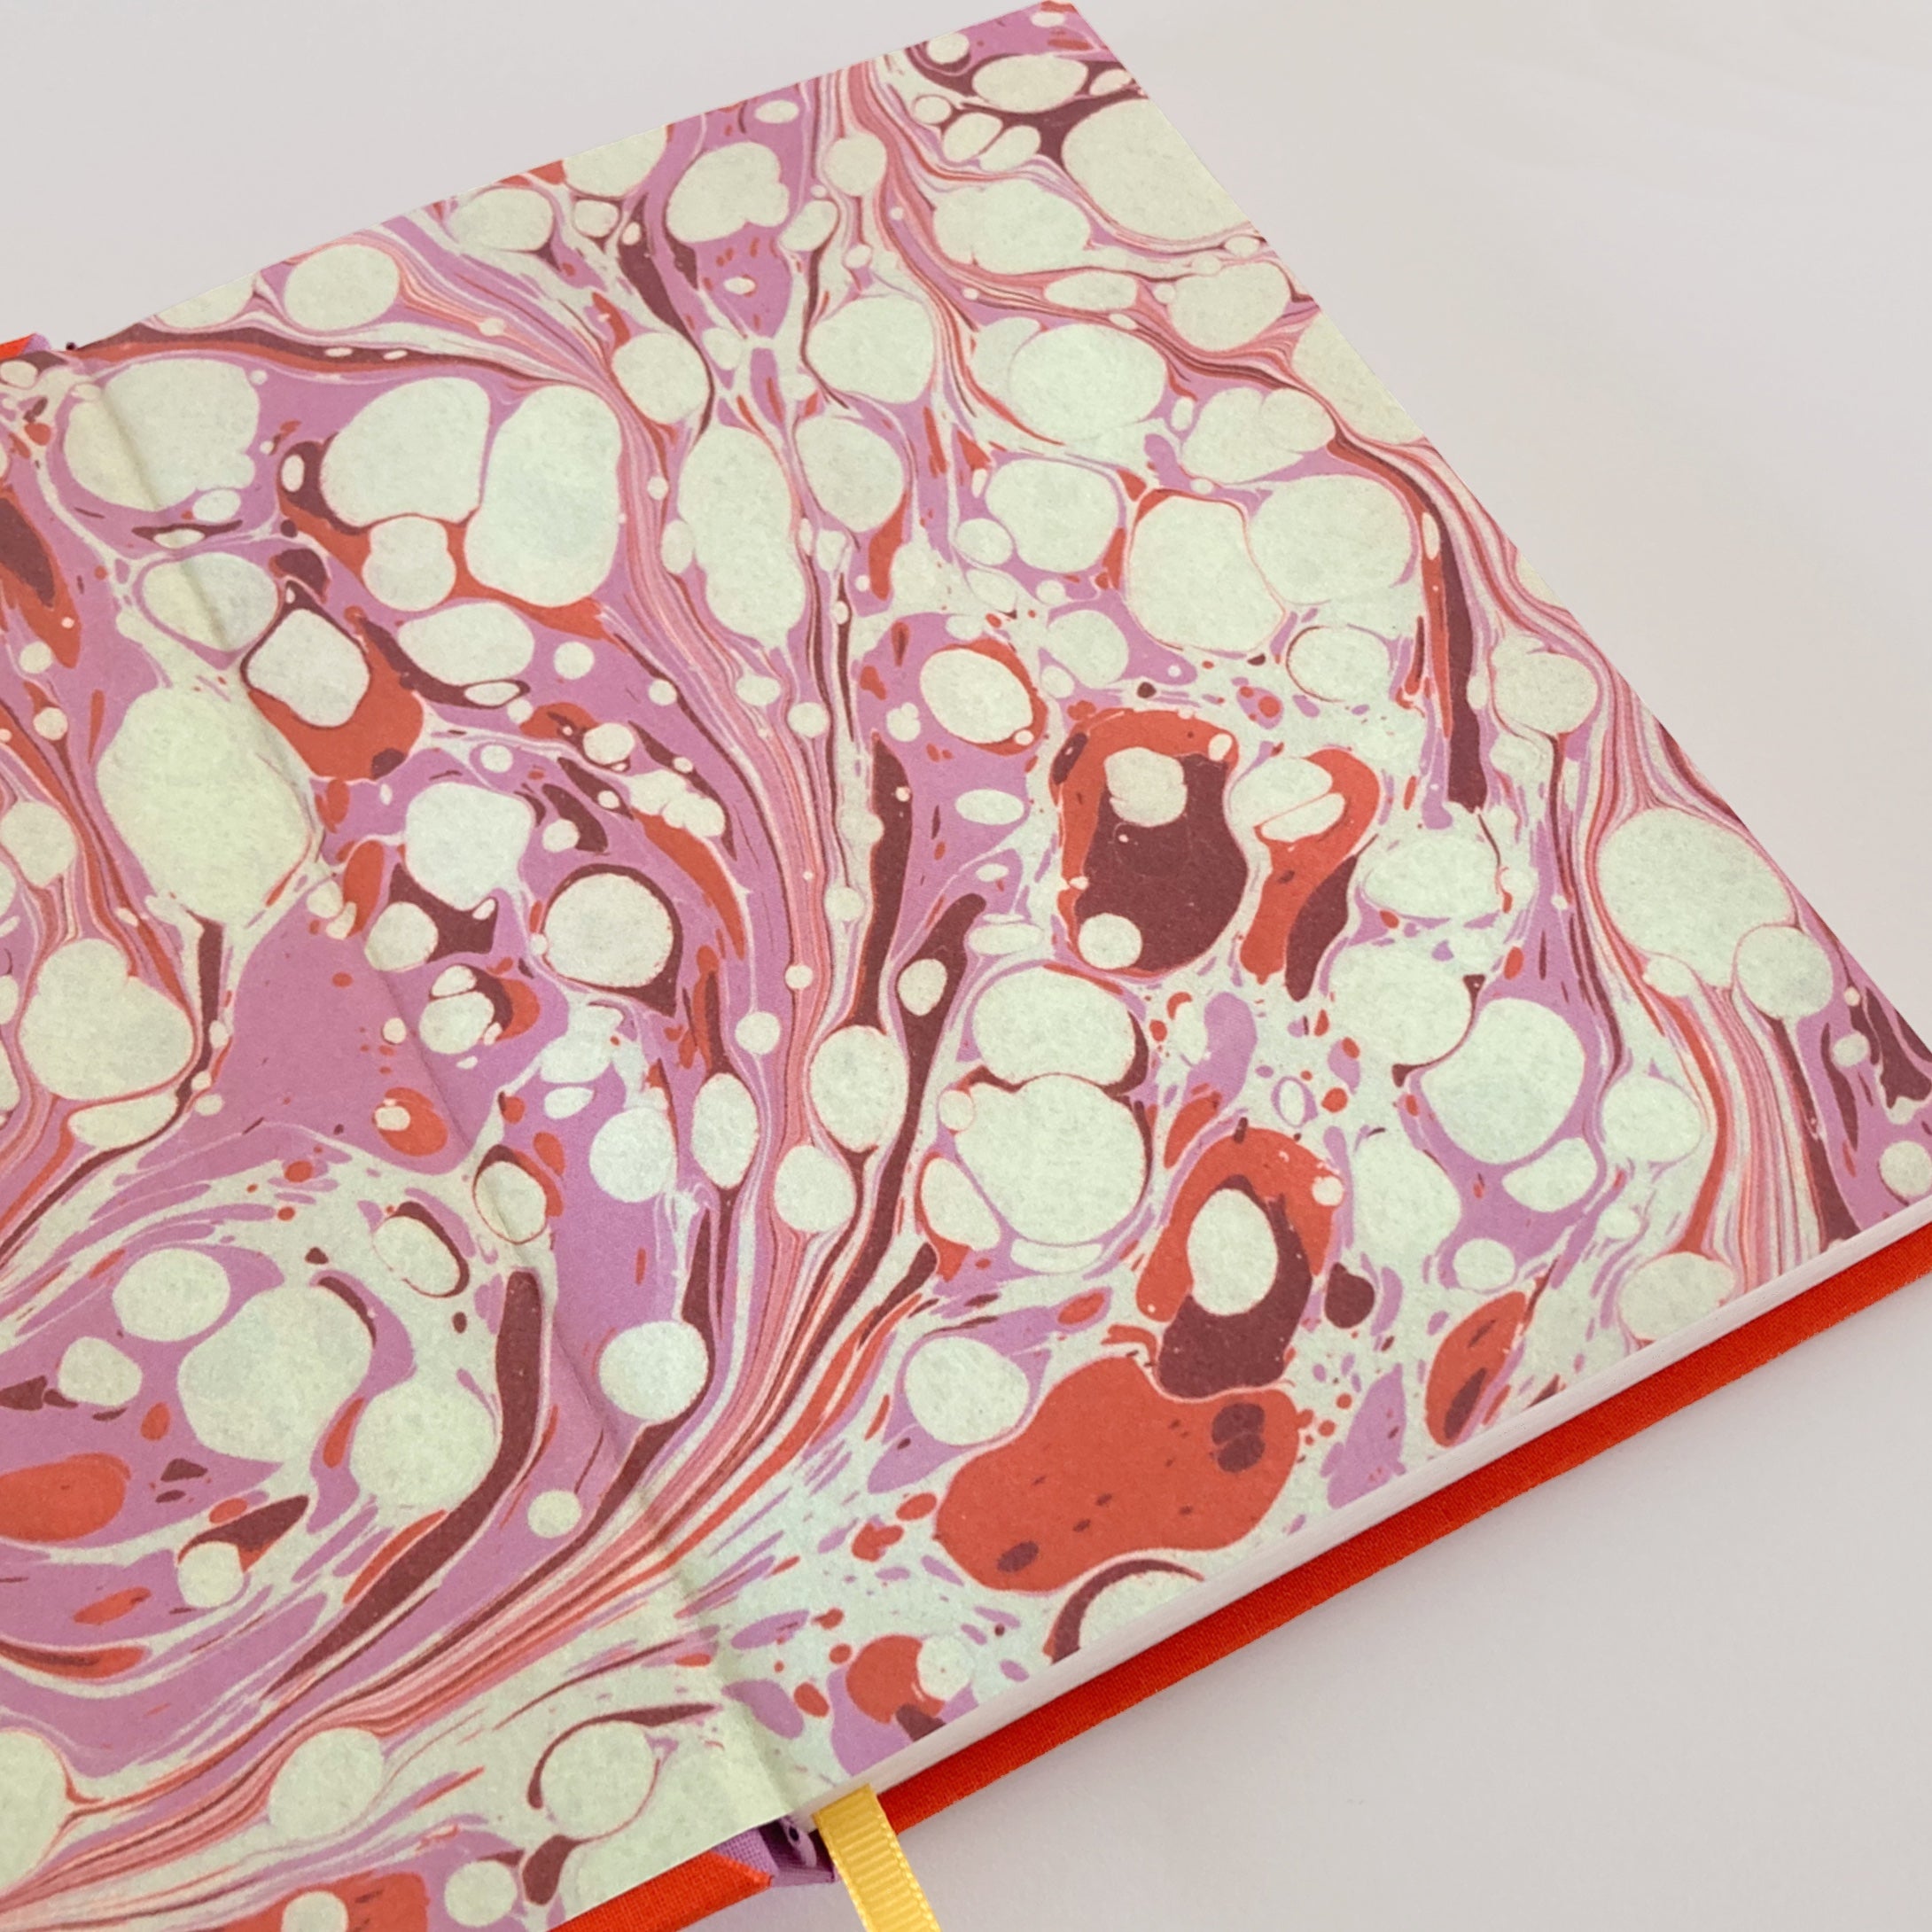 Pink and red marble end pages